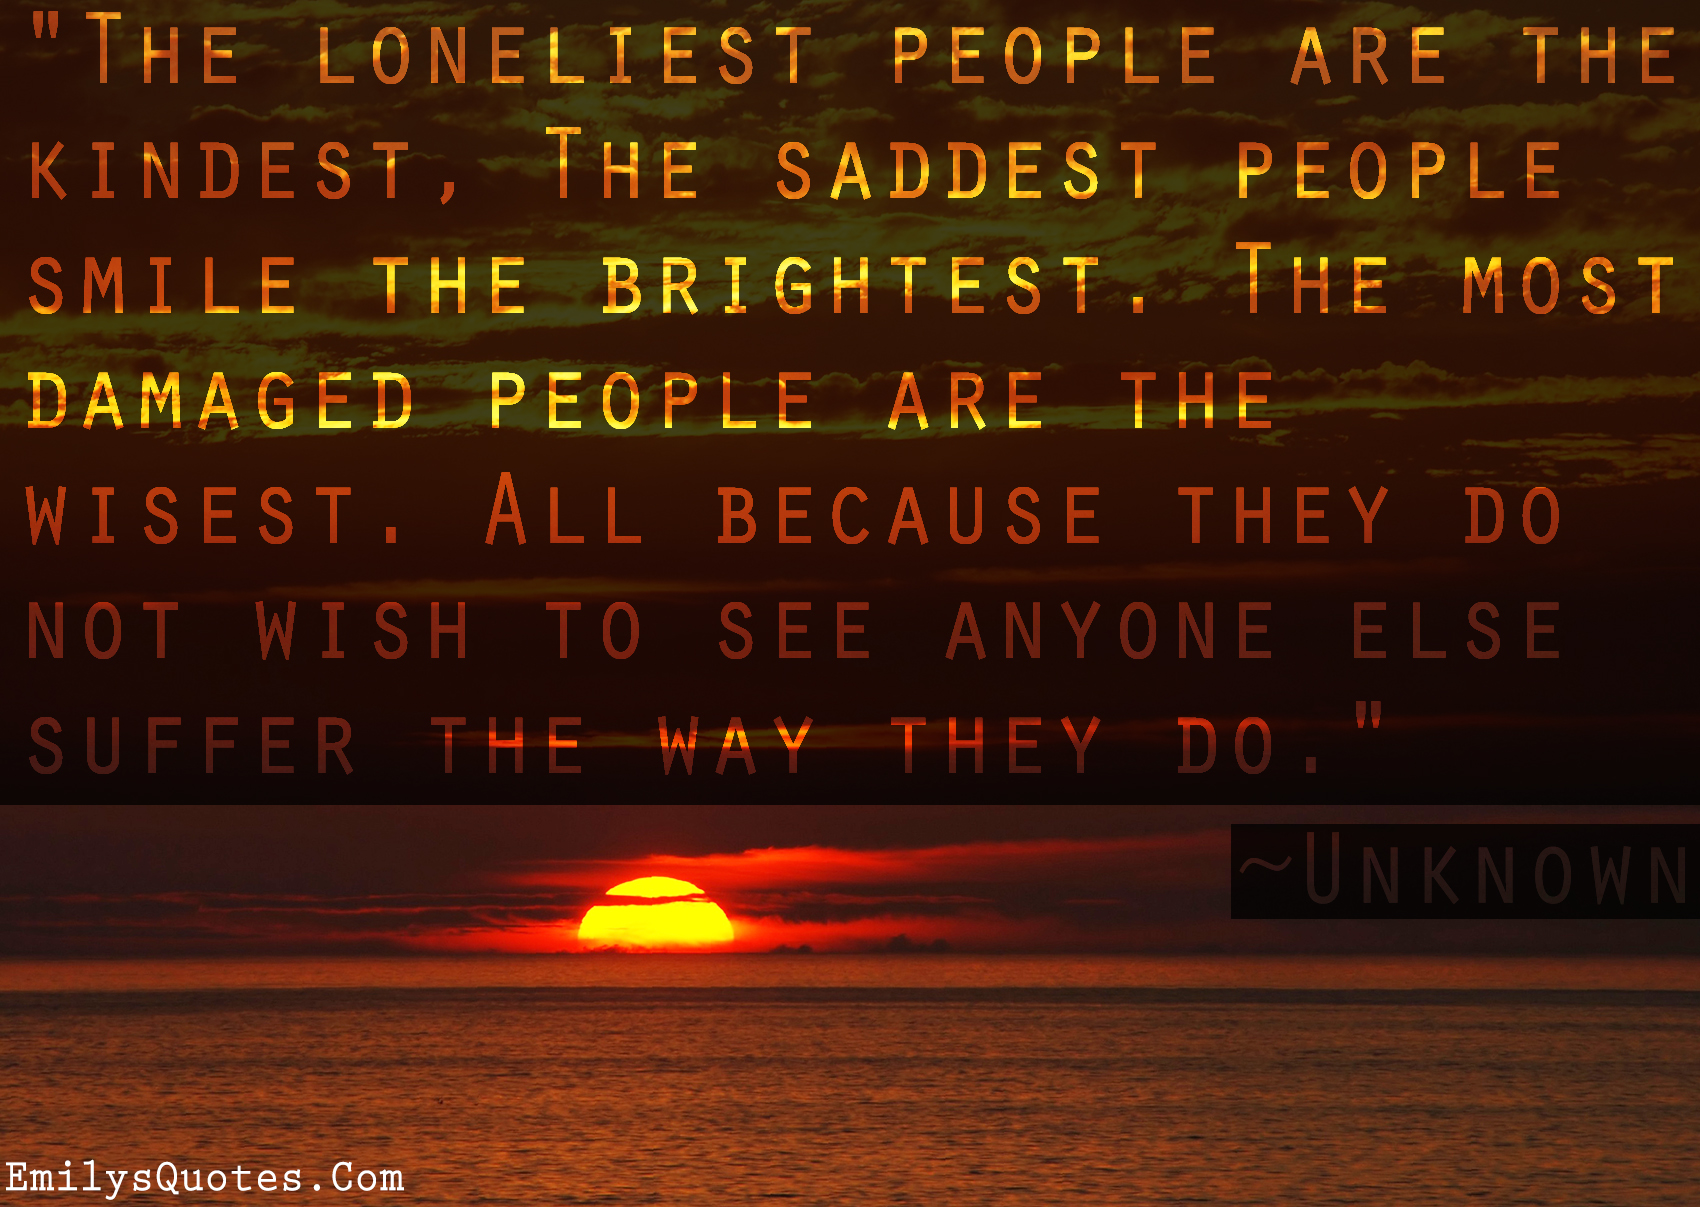 The loneliest people are the kindest, The saddest people smile the brightest. The most damaged people are the wisest. All because they do not wish to see anyone else suffer the way they do